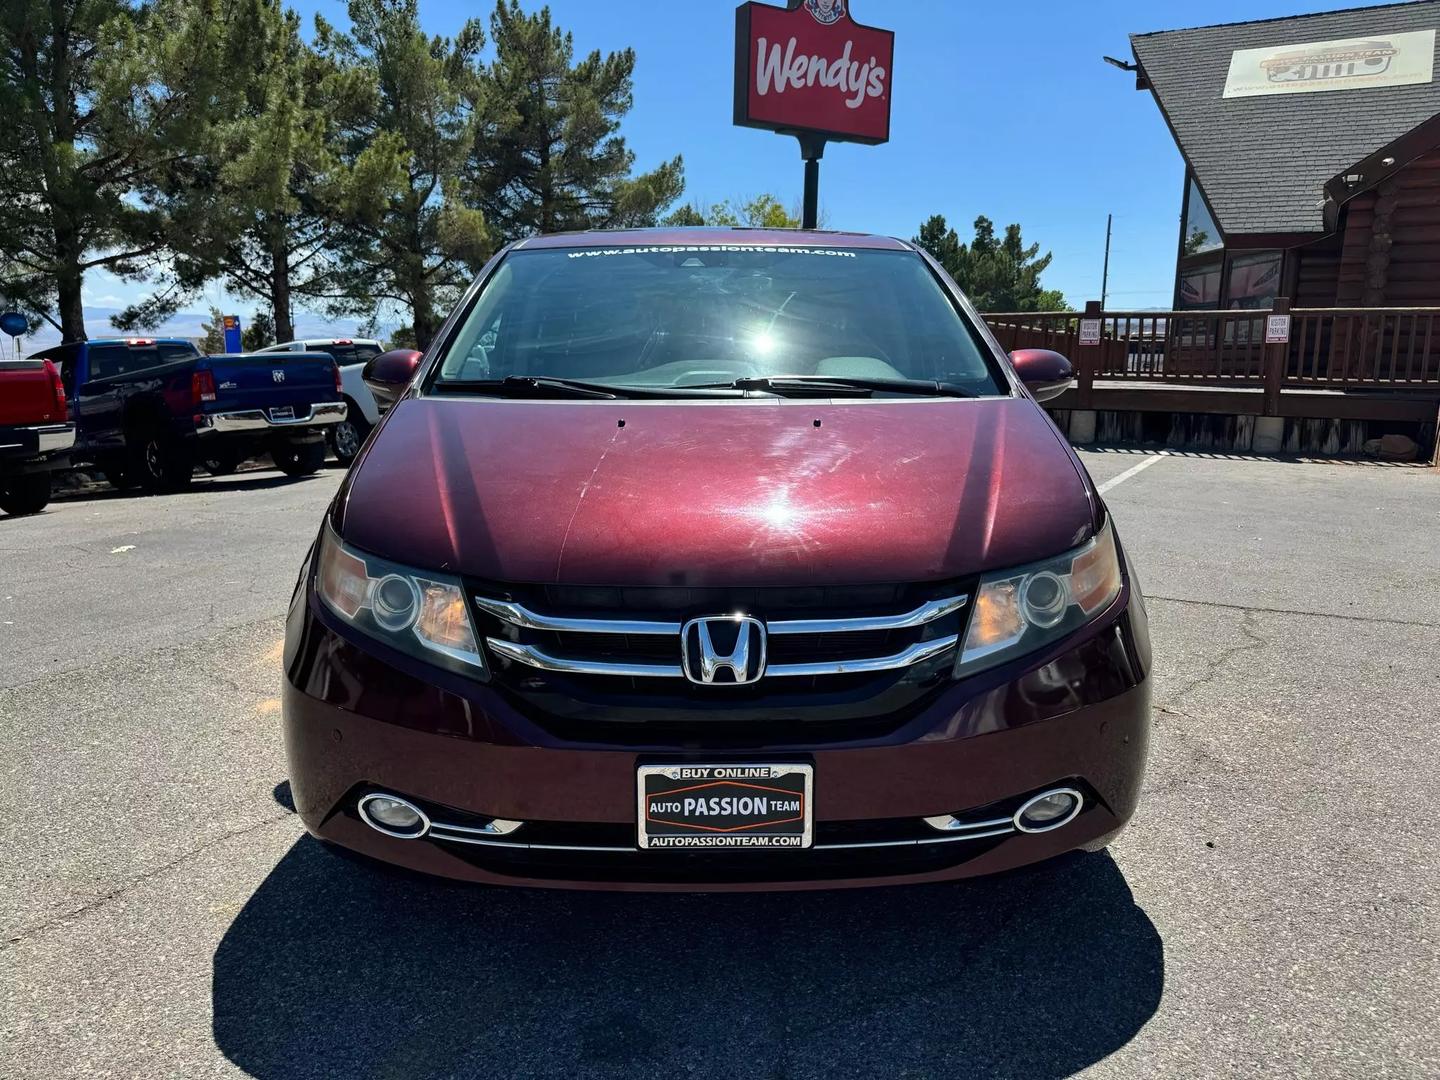 Used 2016 Honda Odyssey Touring with VIN 5FNRL5H94GB141745 for sale in St. George, UT